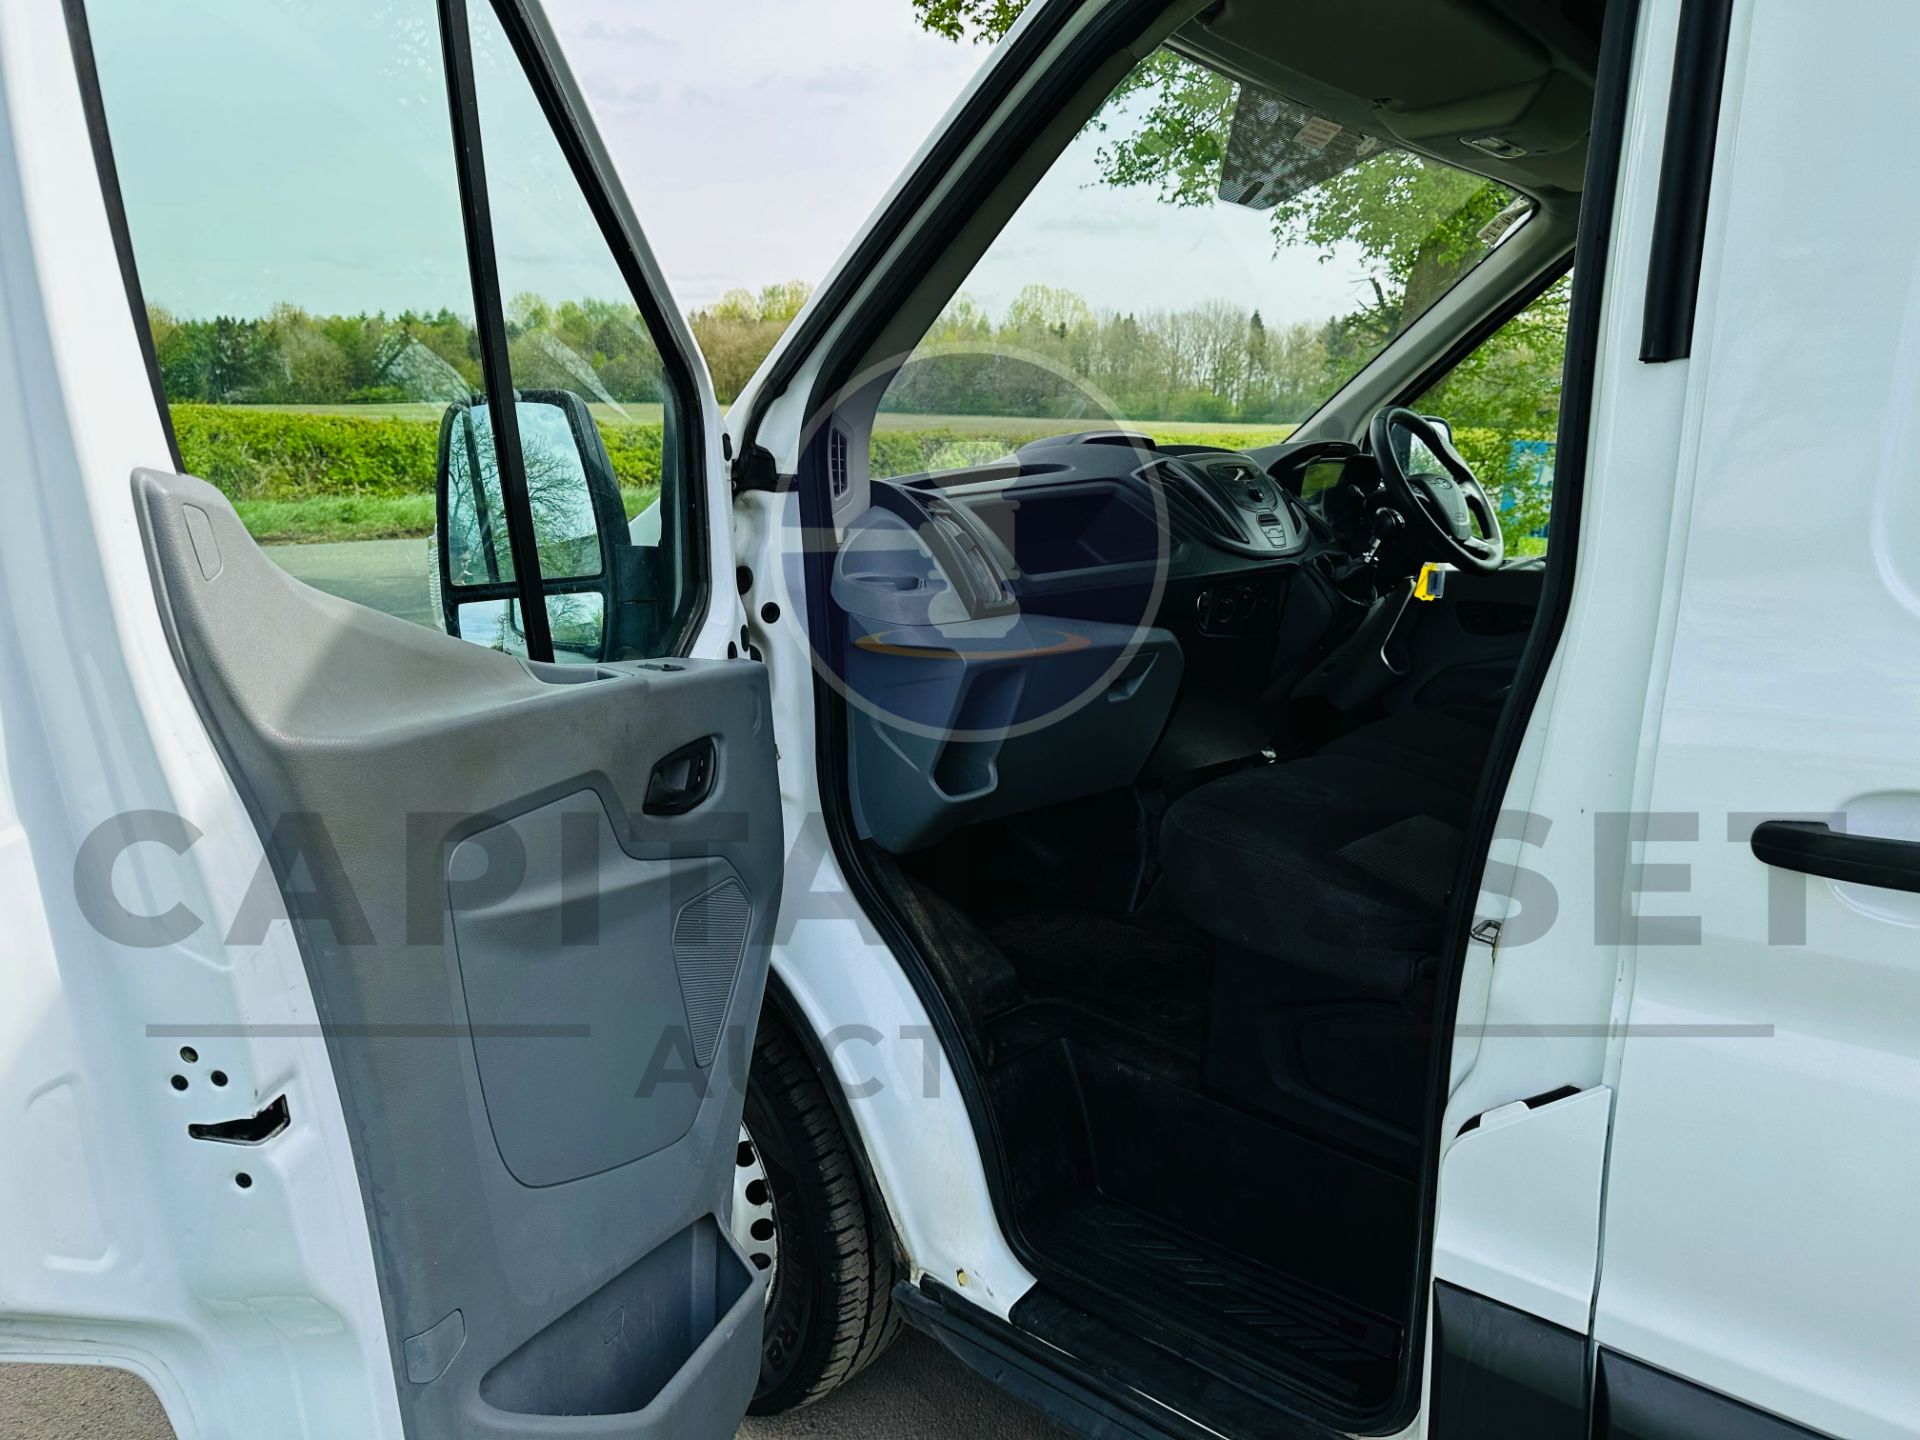 FORD TRANSIT 350 2.0 TDCI *ECOBLUE EDITION* LWB HIGH TOP - EURO 6 - 2019 MODEL - 1 OWNER - LOOK!!! - Image 17 of 32